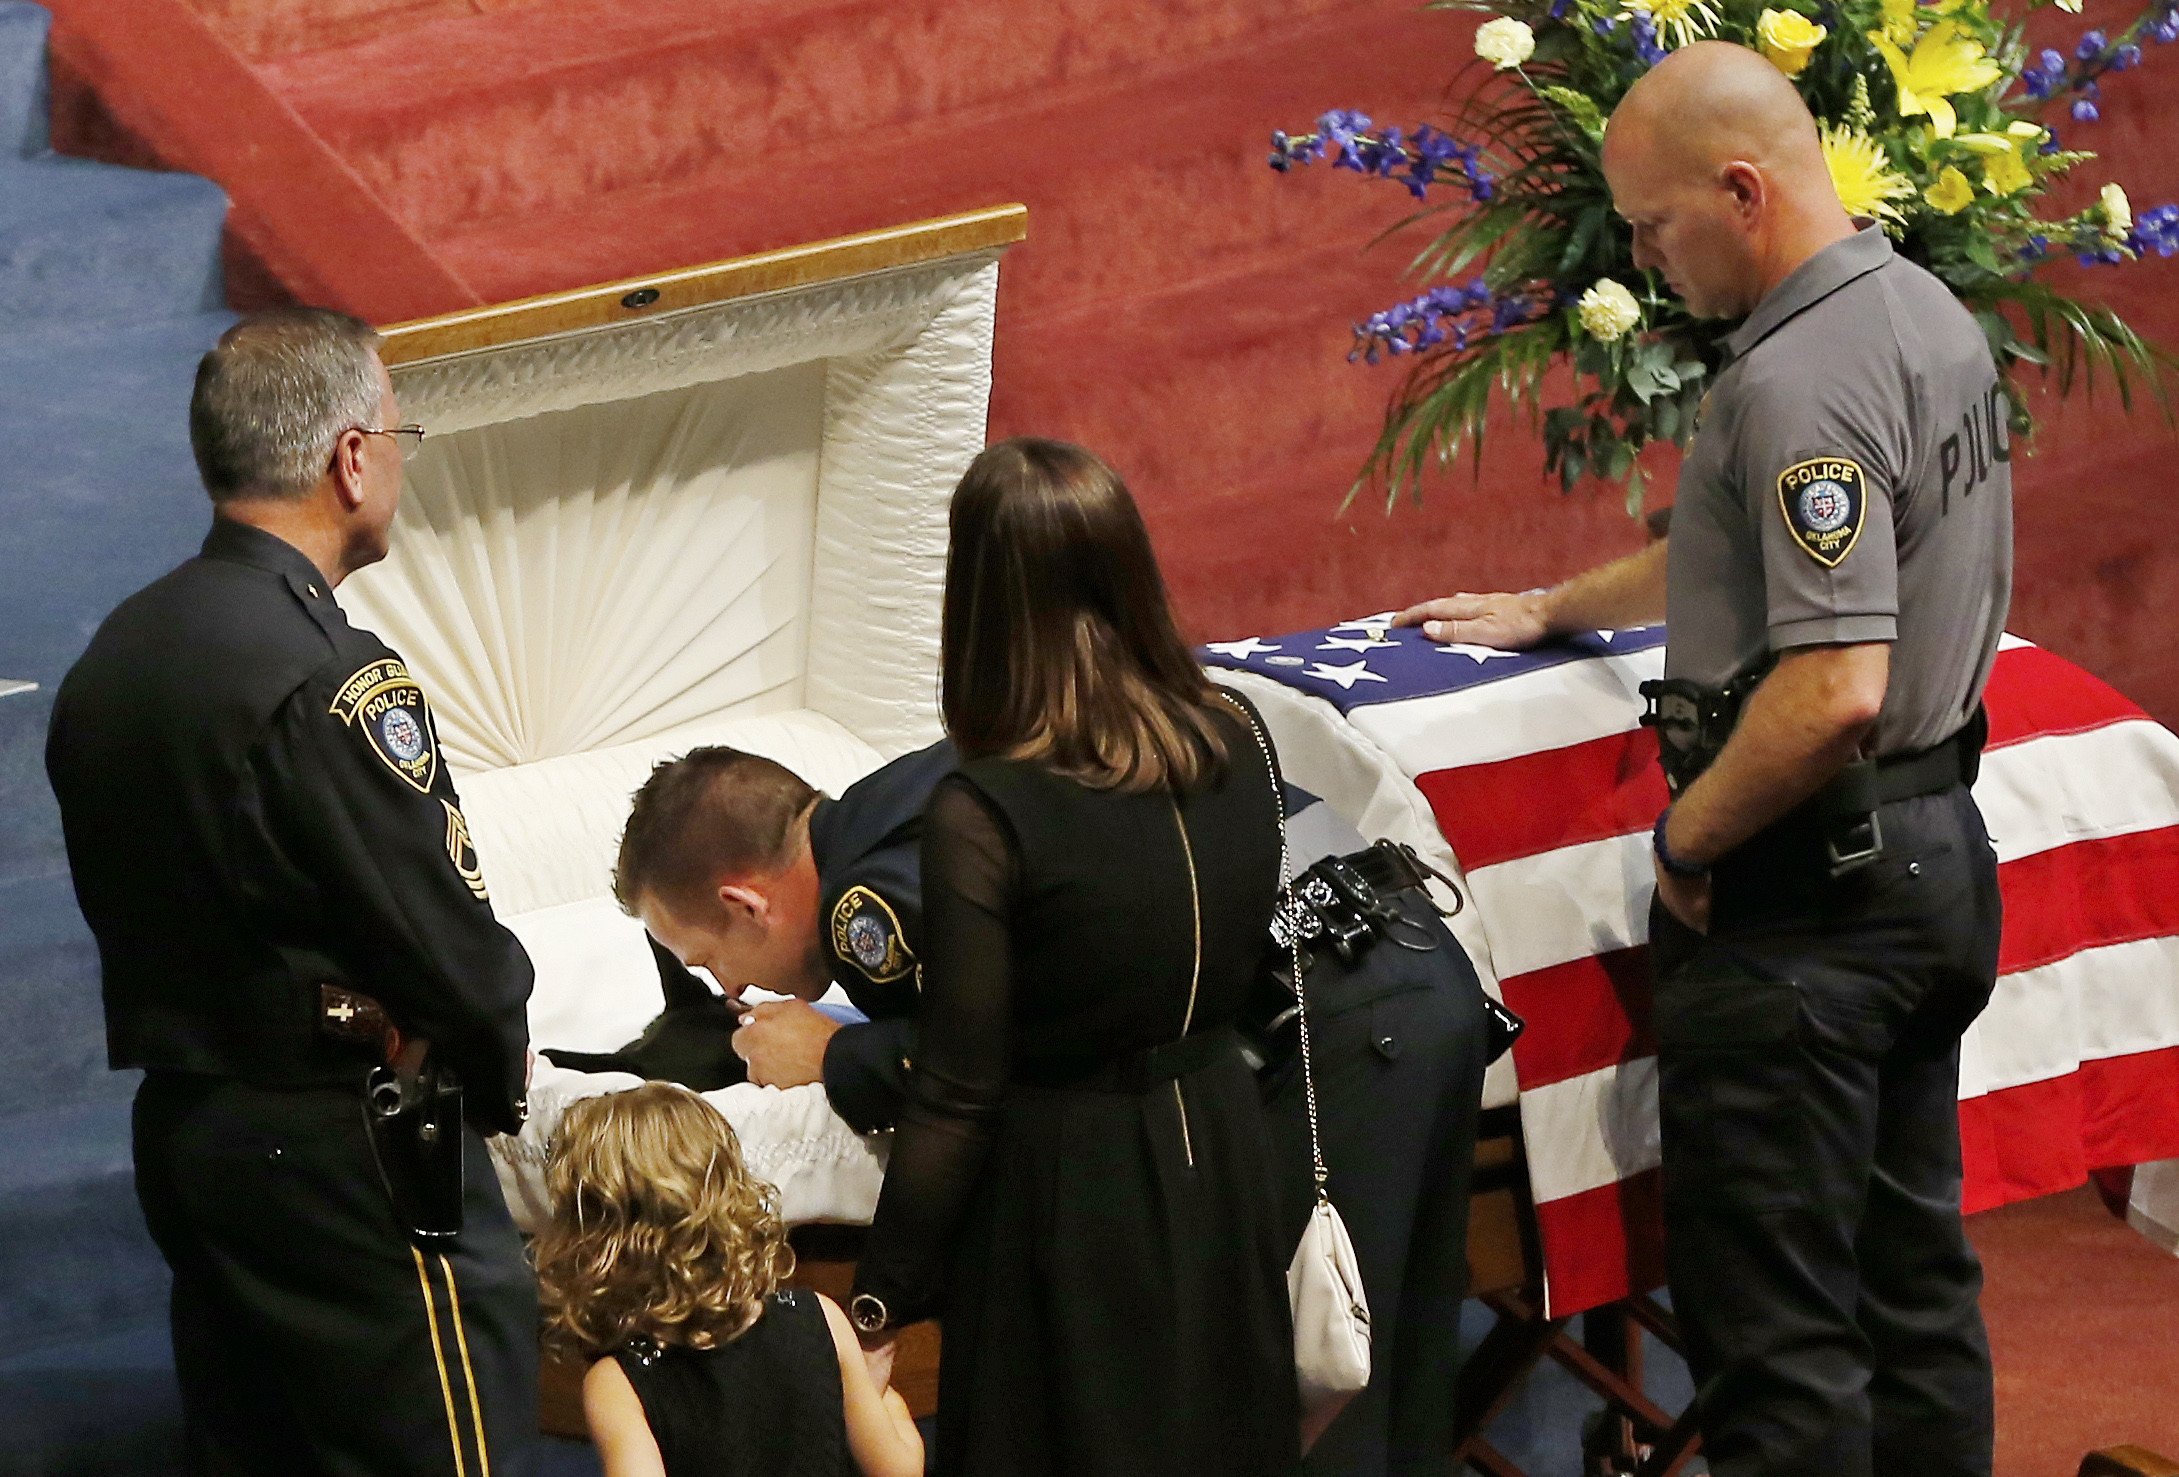 Oklahoma City police officer Sgt. Ryan Stark, center, leans over the casket of his canine partner, K-9 Kye, following funeral services for the dog in Oklahoma City, on Aug. 28, 2014. 